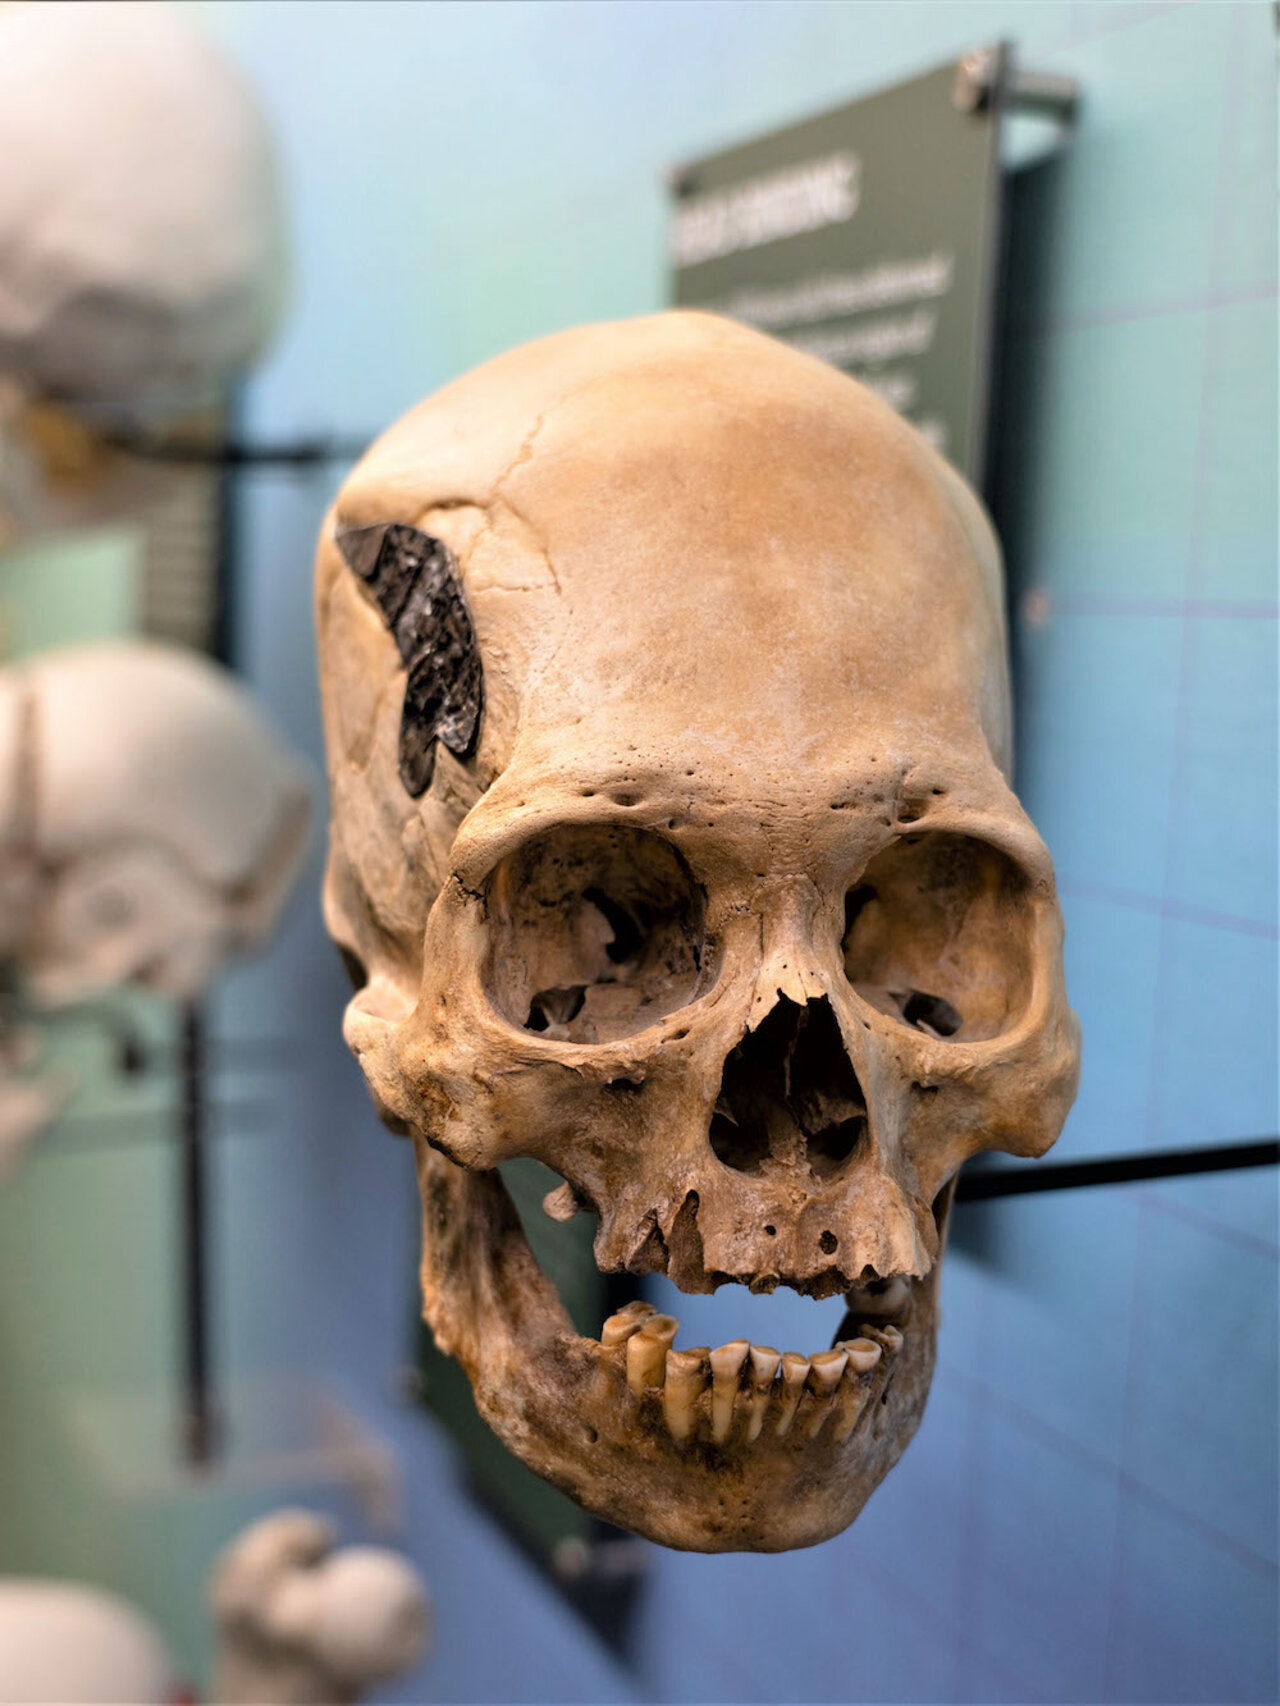 Ancient Peruvian skull with metal implant baffles scientists